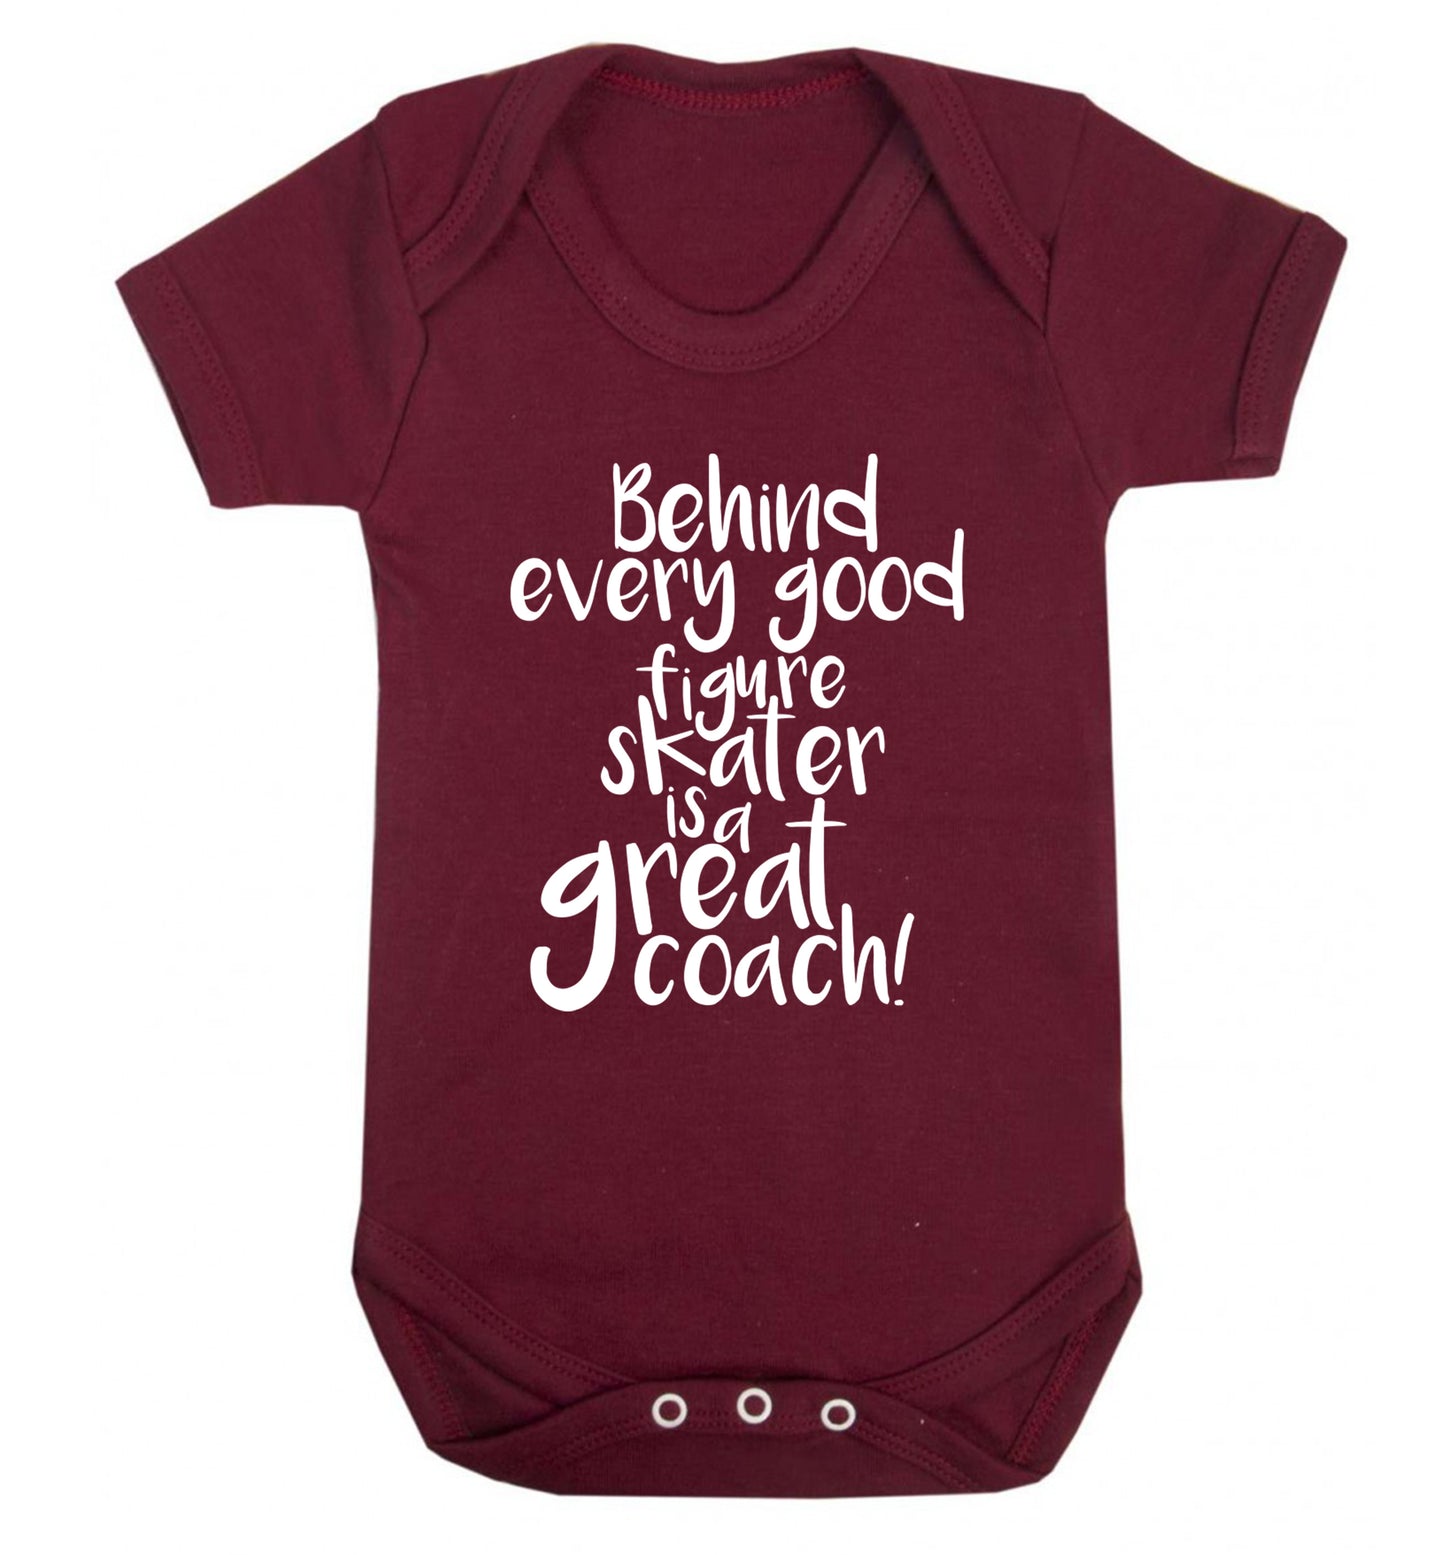 Behind every good figure skater is a great coach Baby Vest maroon 18-24 months